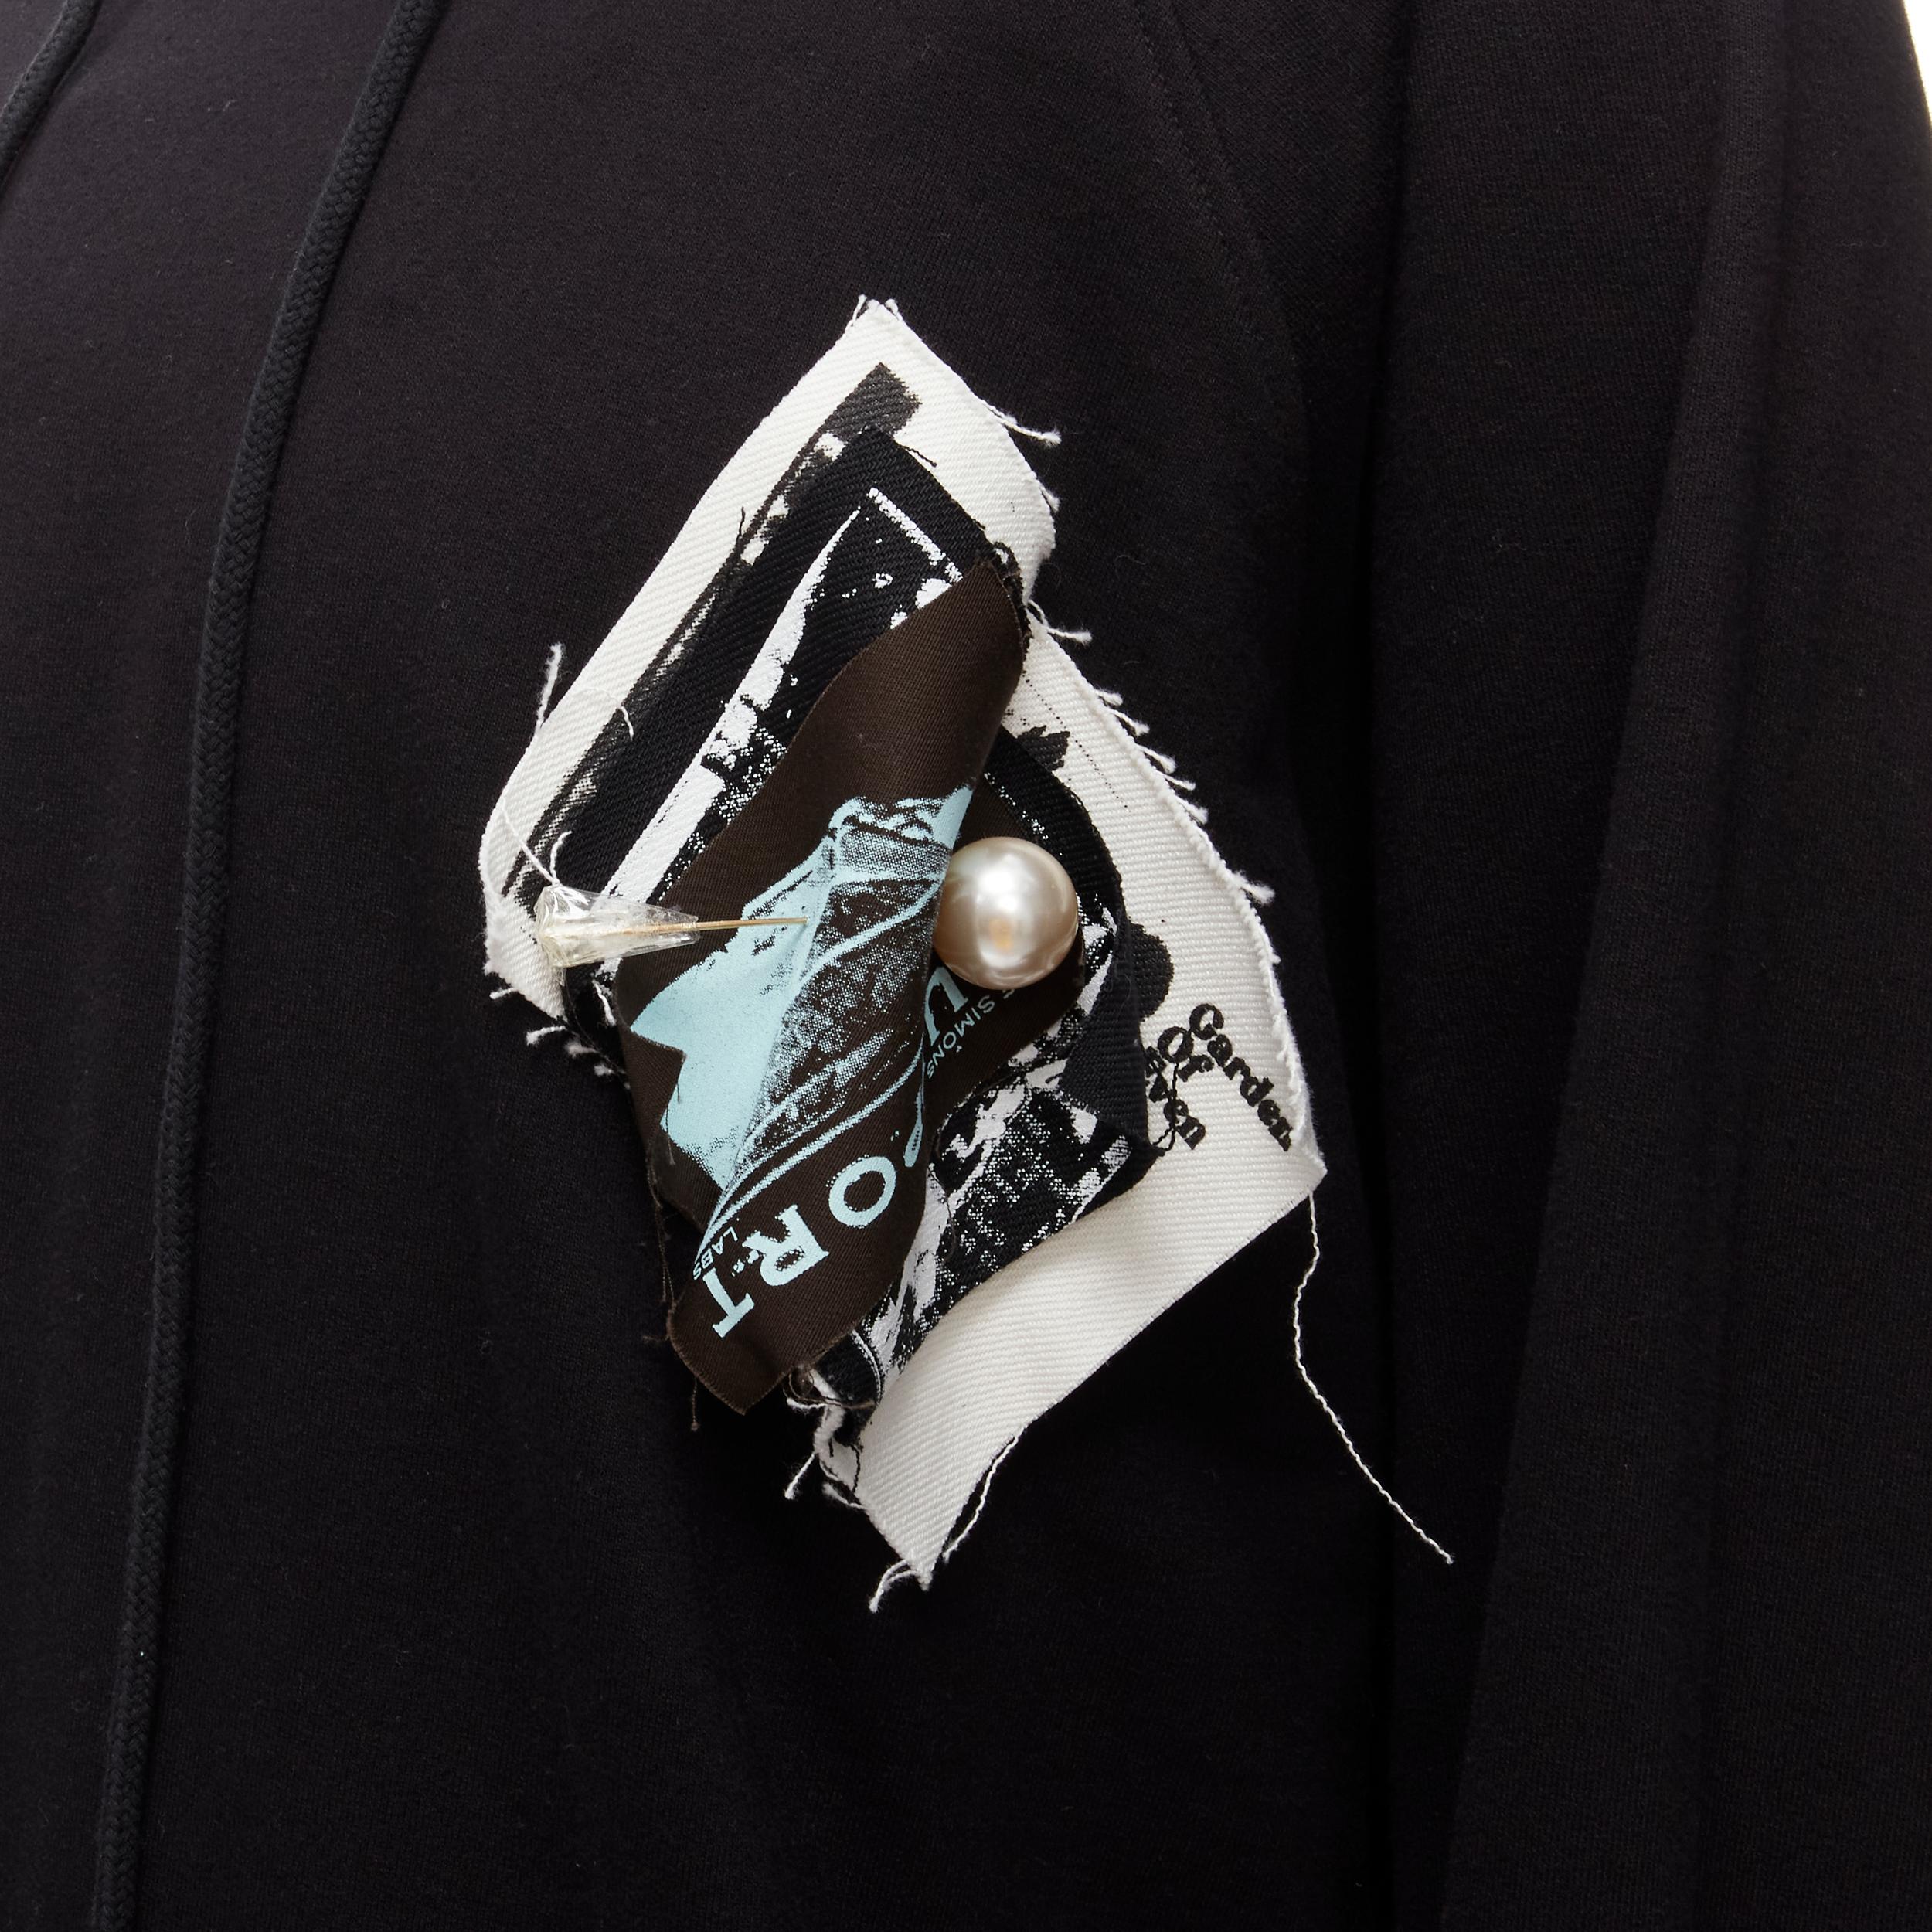 new RAF SIMONS 2020 Support Labs XL pearl pin brooch patchwork oversized hoodie XS
Reference: TGAS/D00200
Brand: Raf Simons
Designer: Raf Simons
Collection: 2020 Support Labs
Material: Cotton
Color: Black, Multicolour
Pattern: Abstract
Closure: